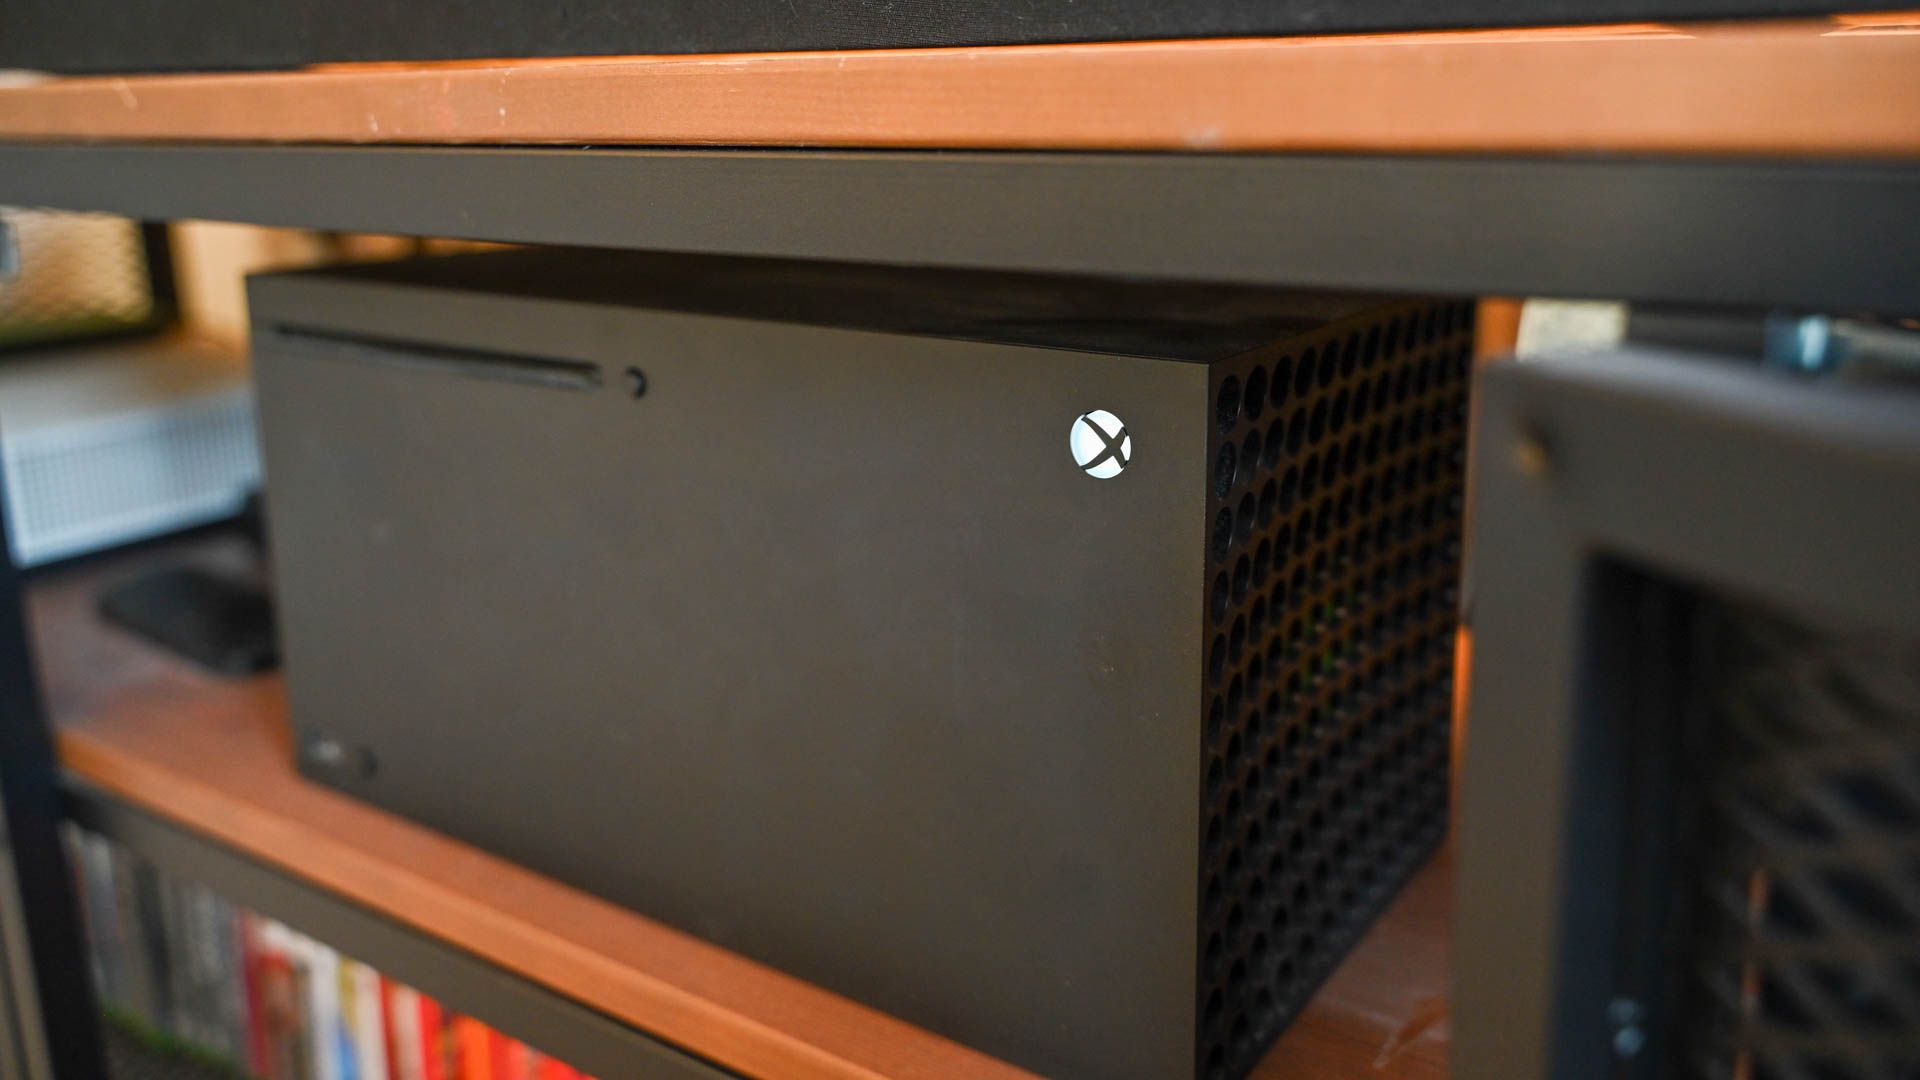 The best Xbox Series X accessories in 2023